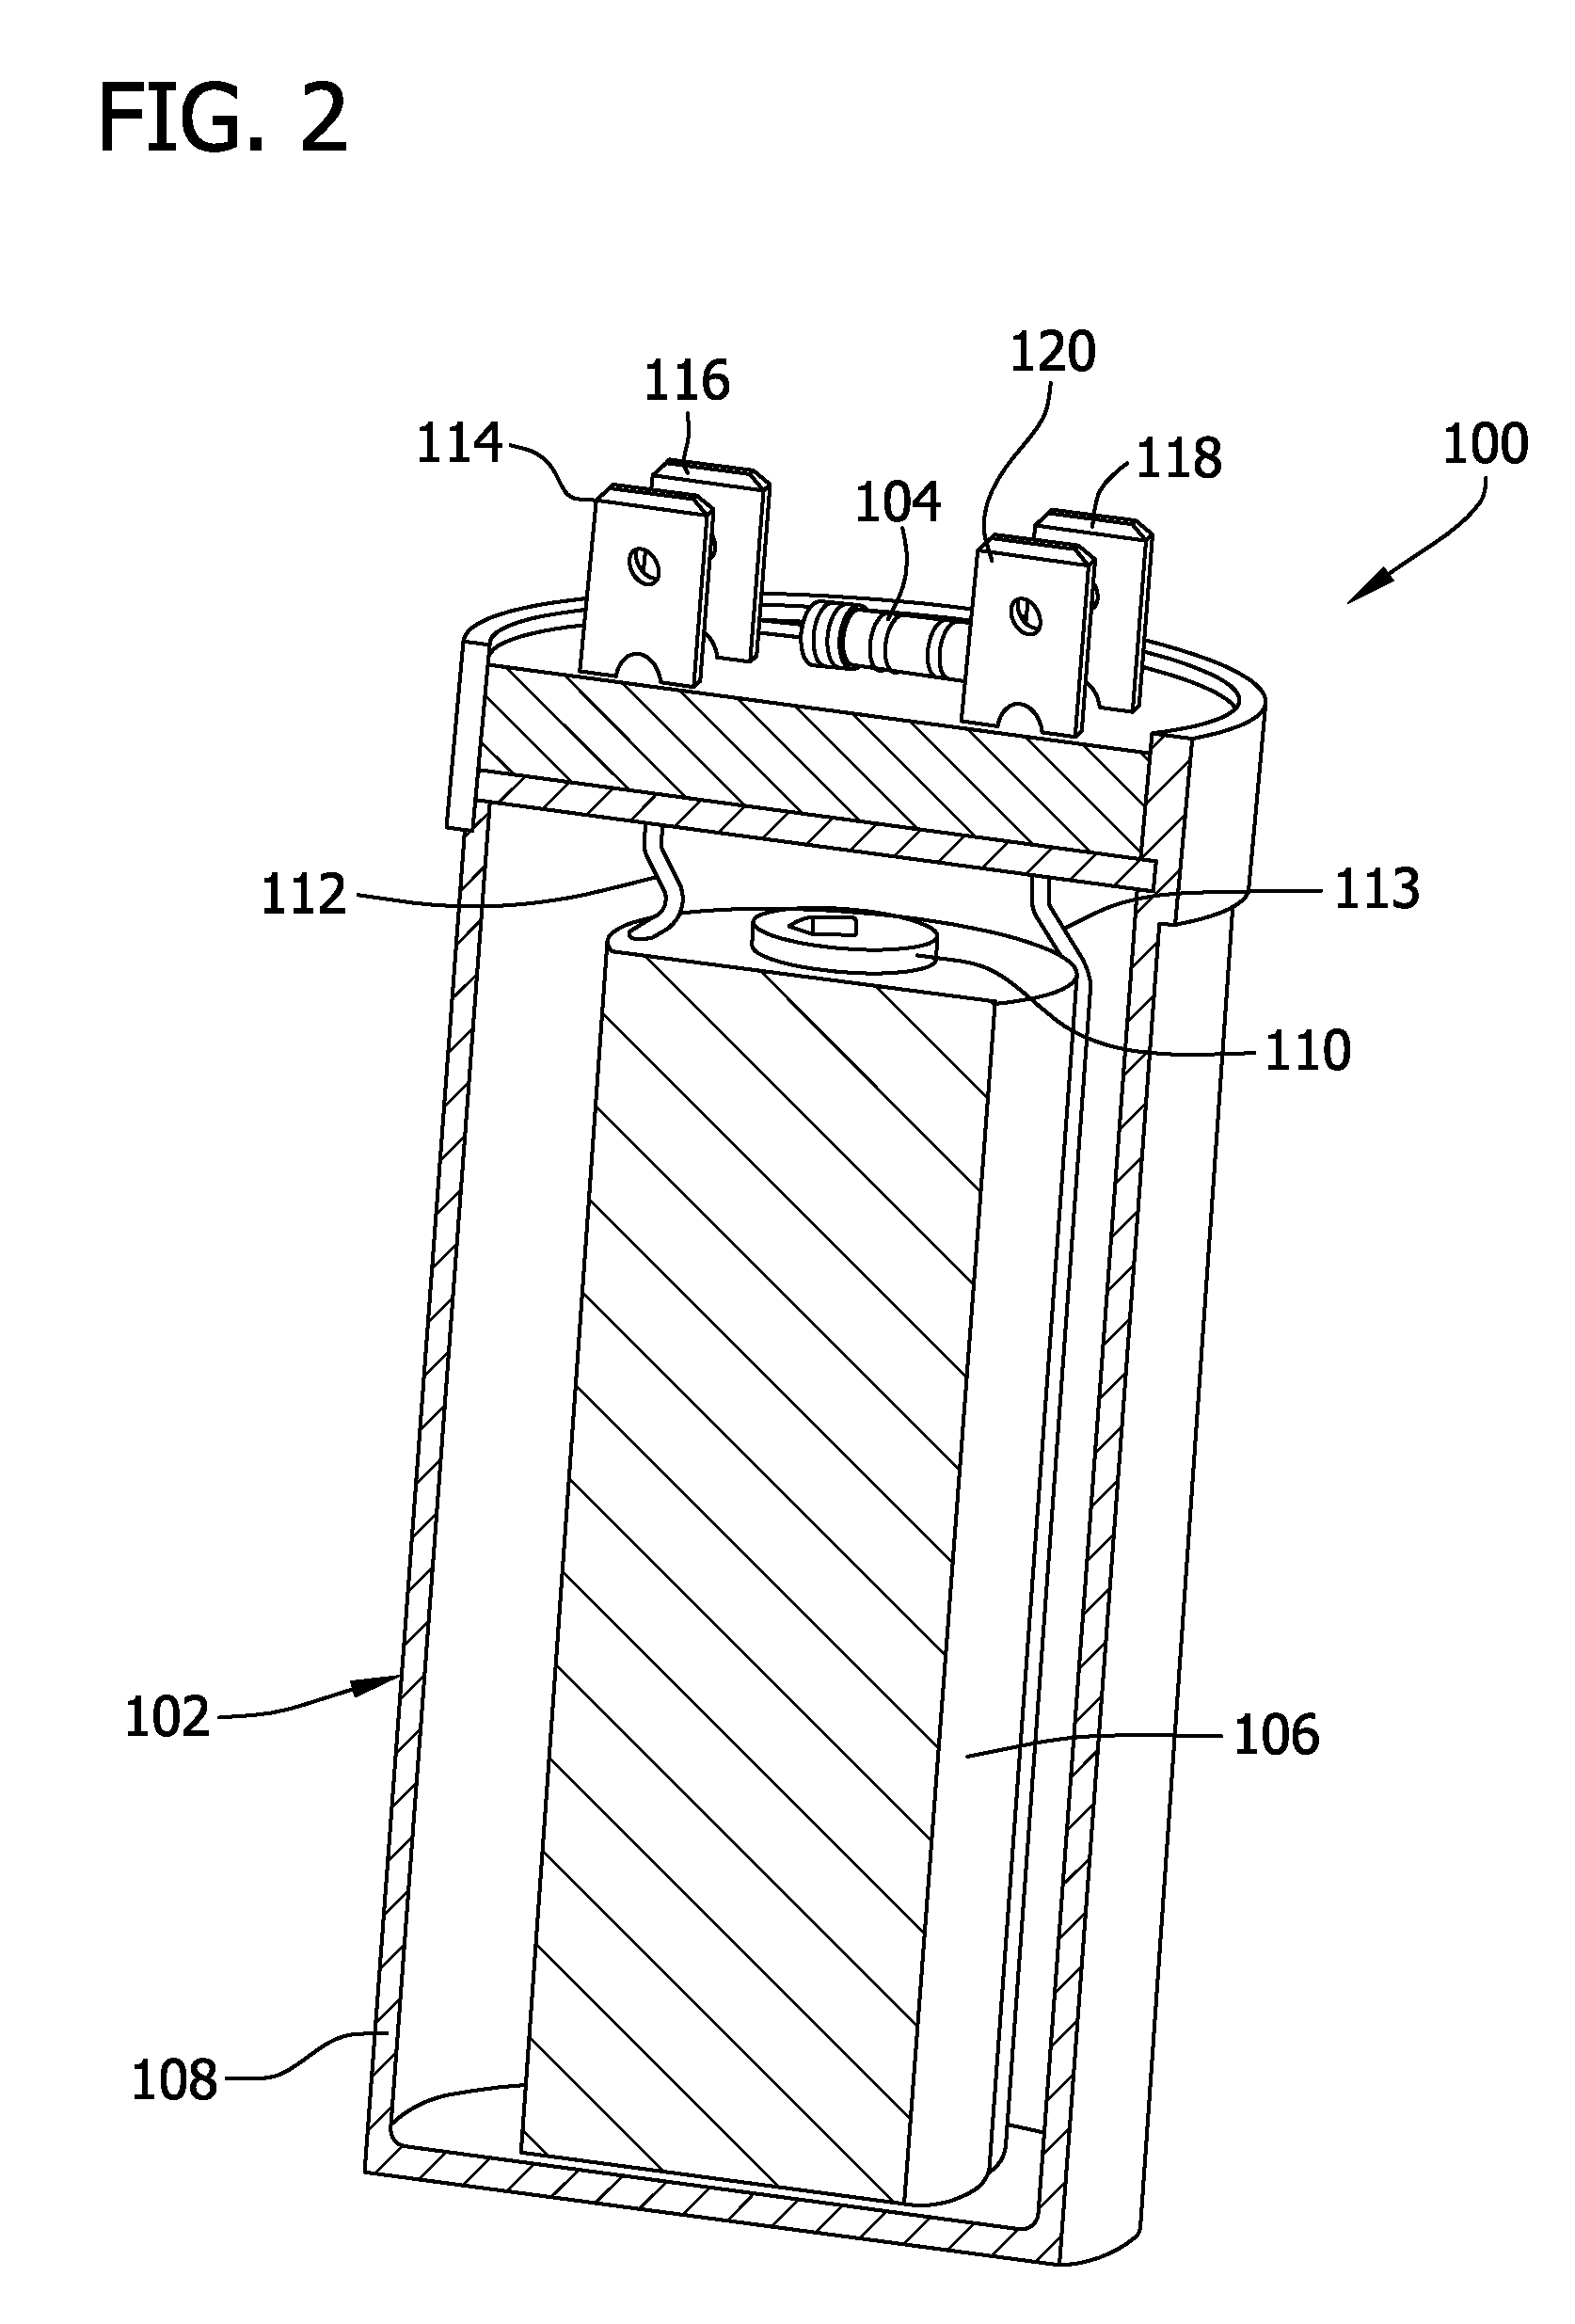 Start capacitor assemblies and methods for operating electric motors